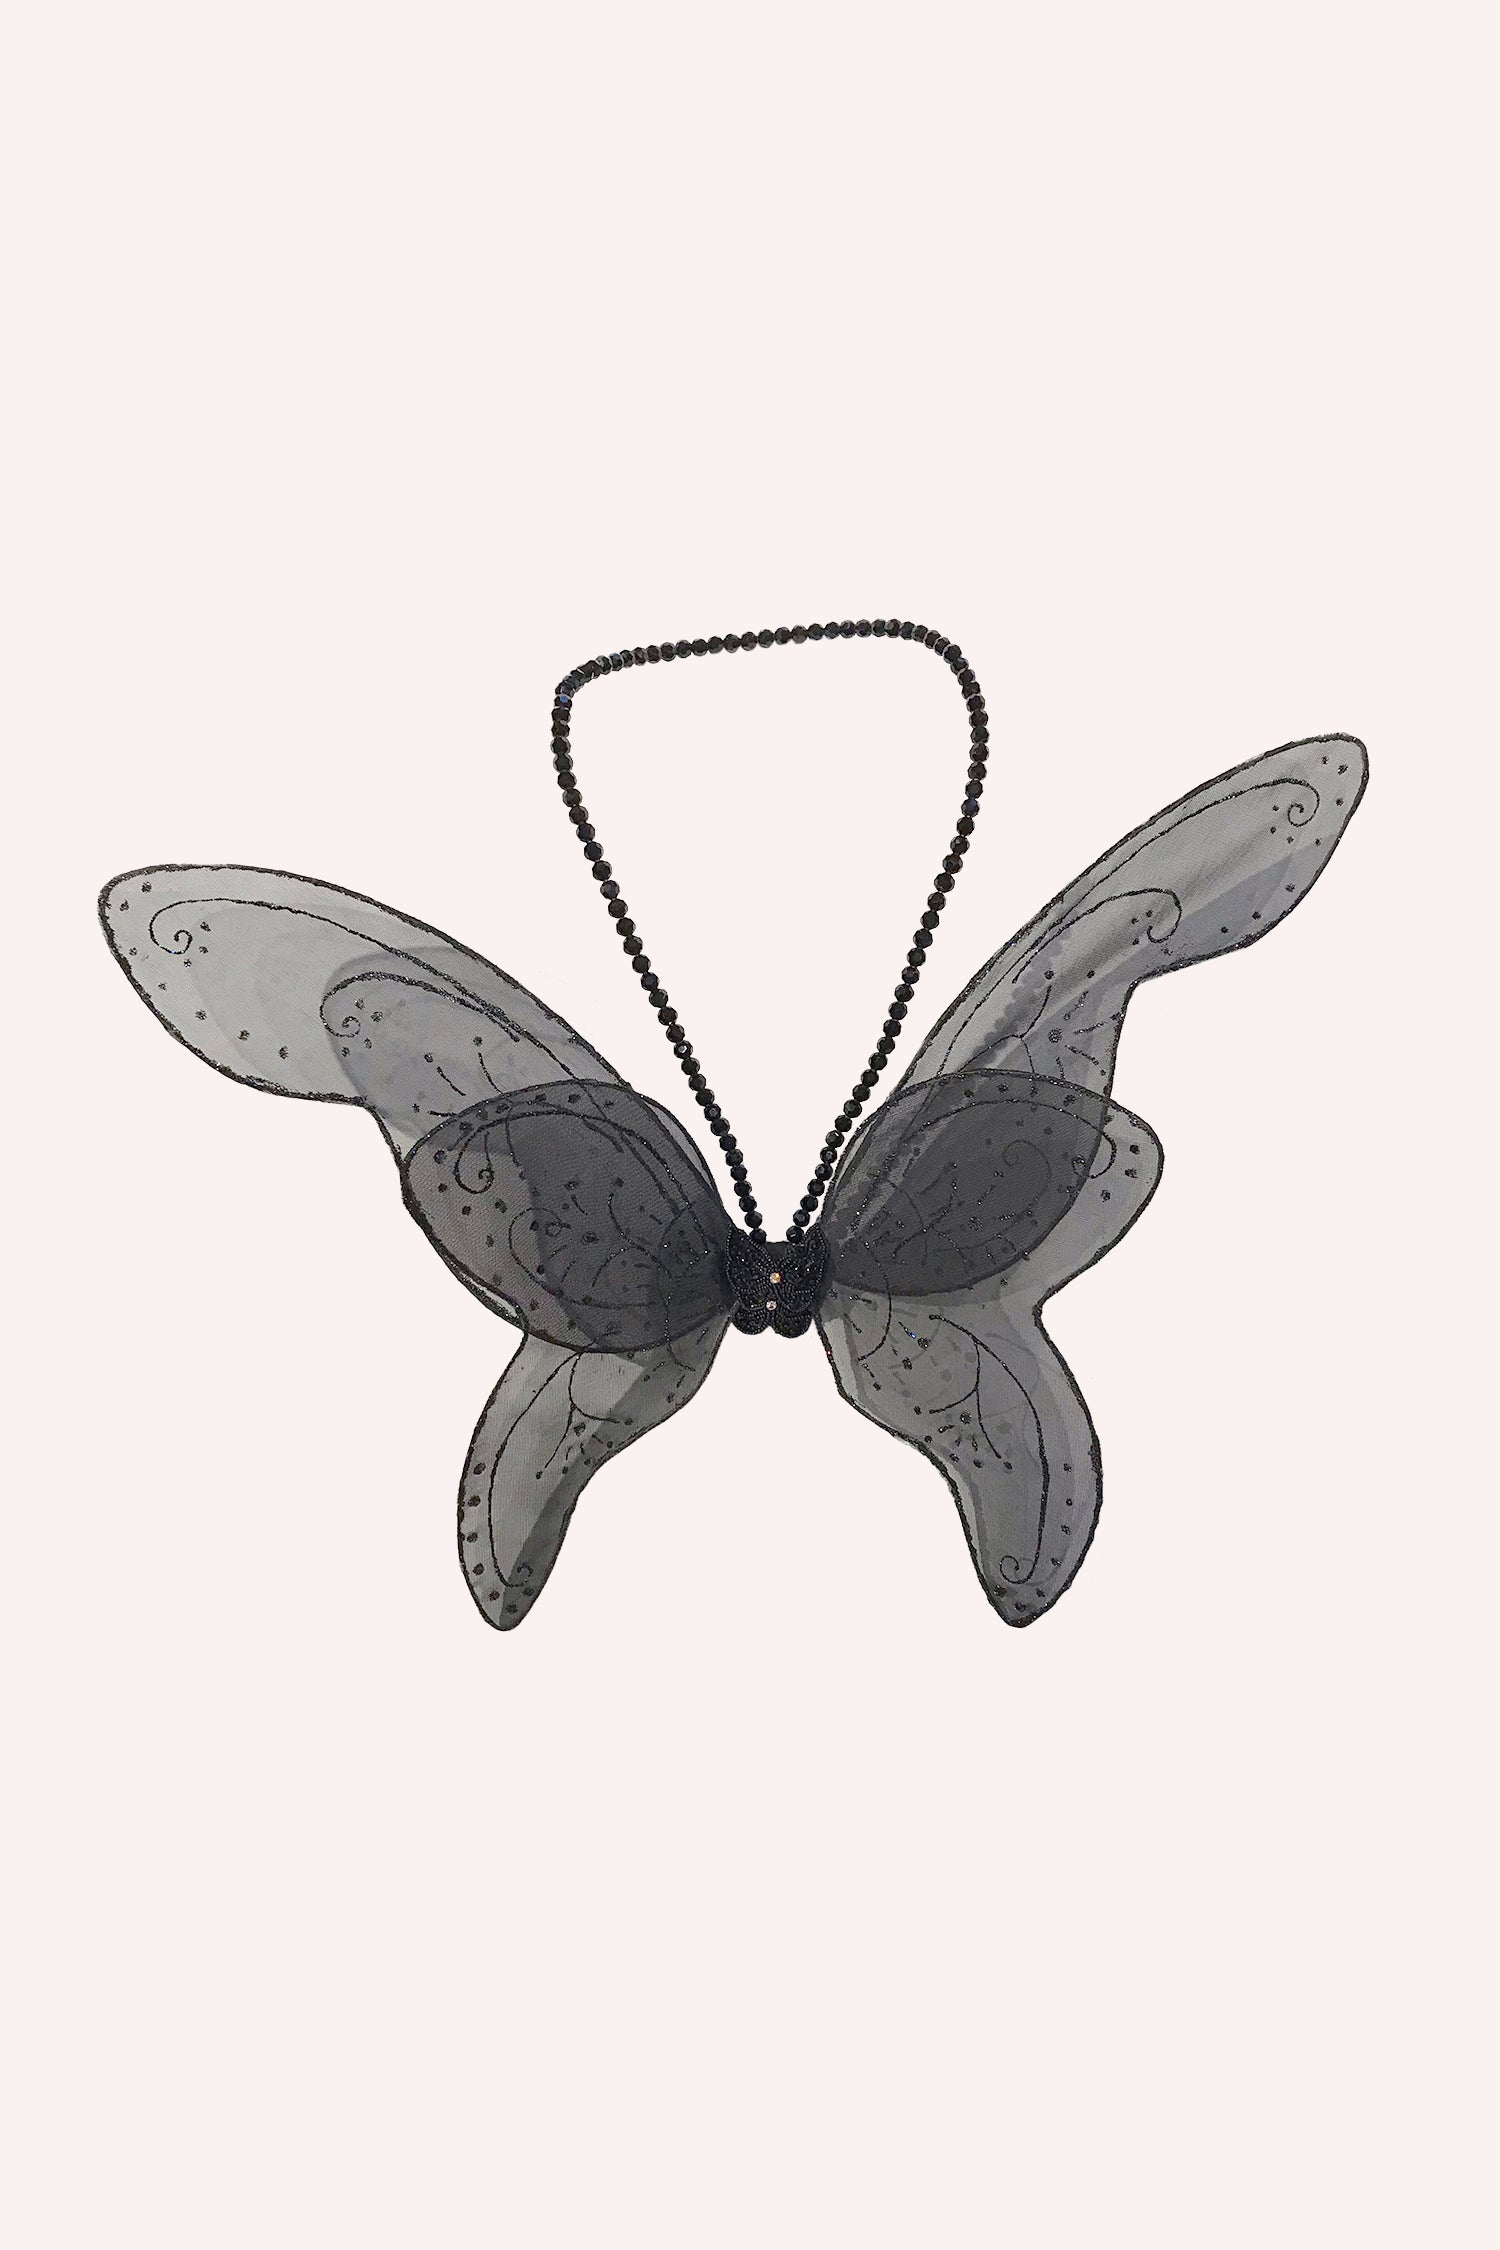 They are light black with black floral encrustations, 2 large and 2 smaller wings at the a shiny body center."